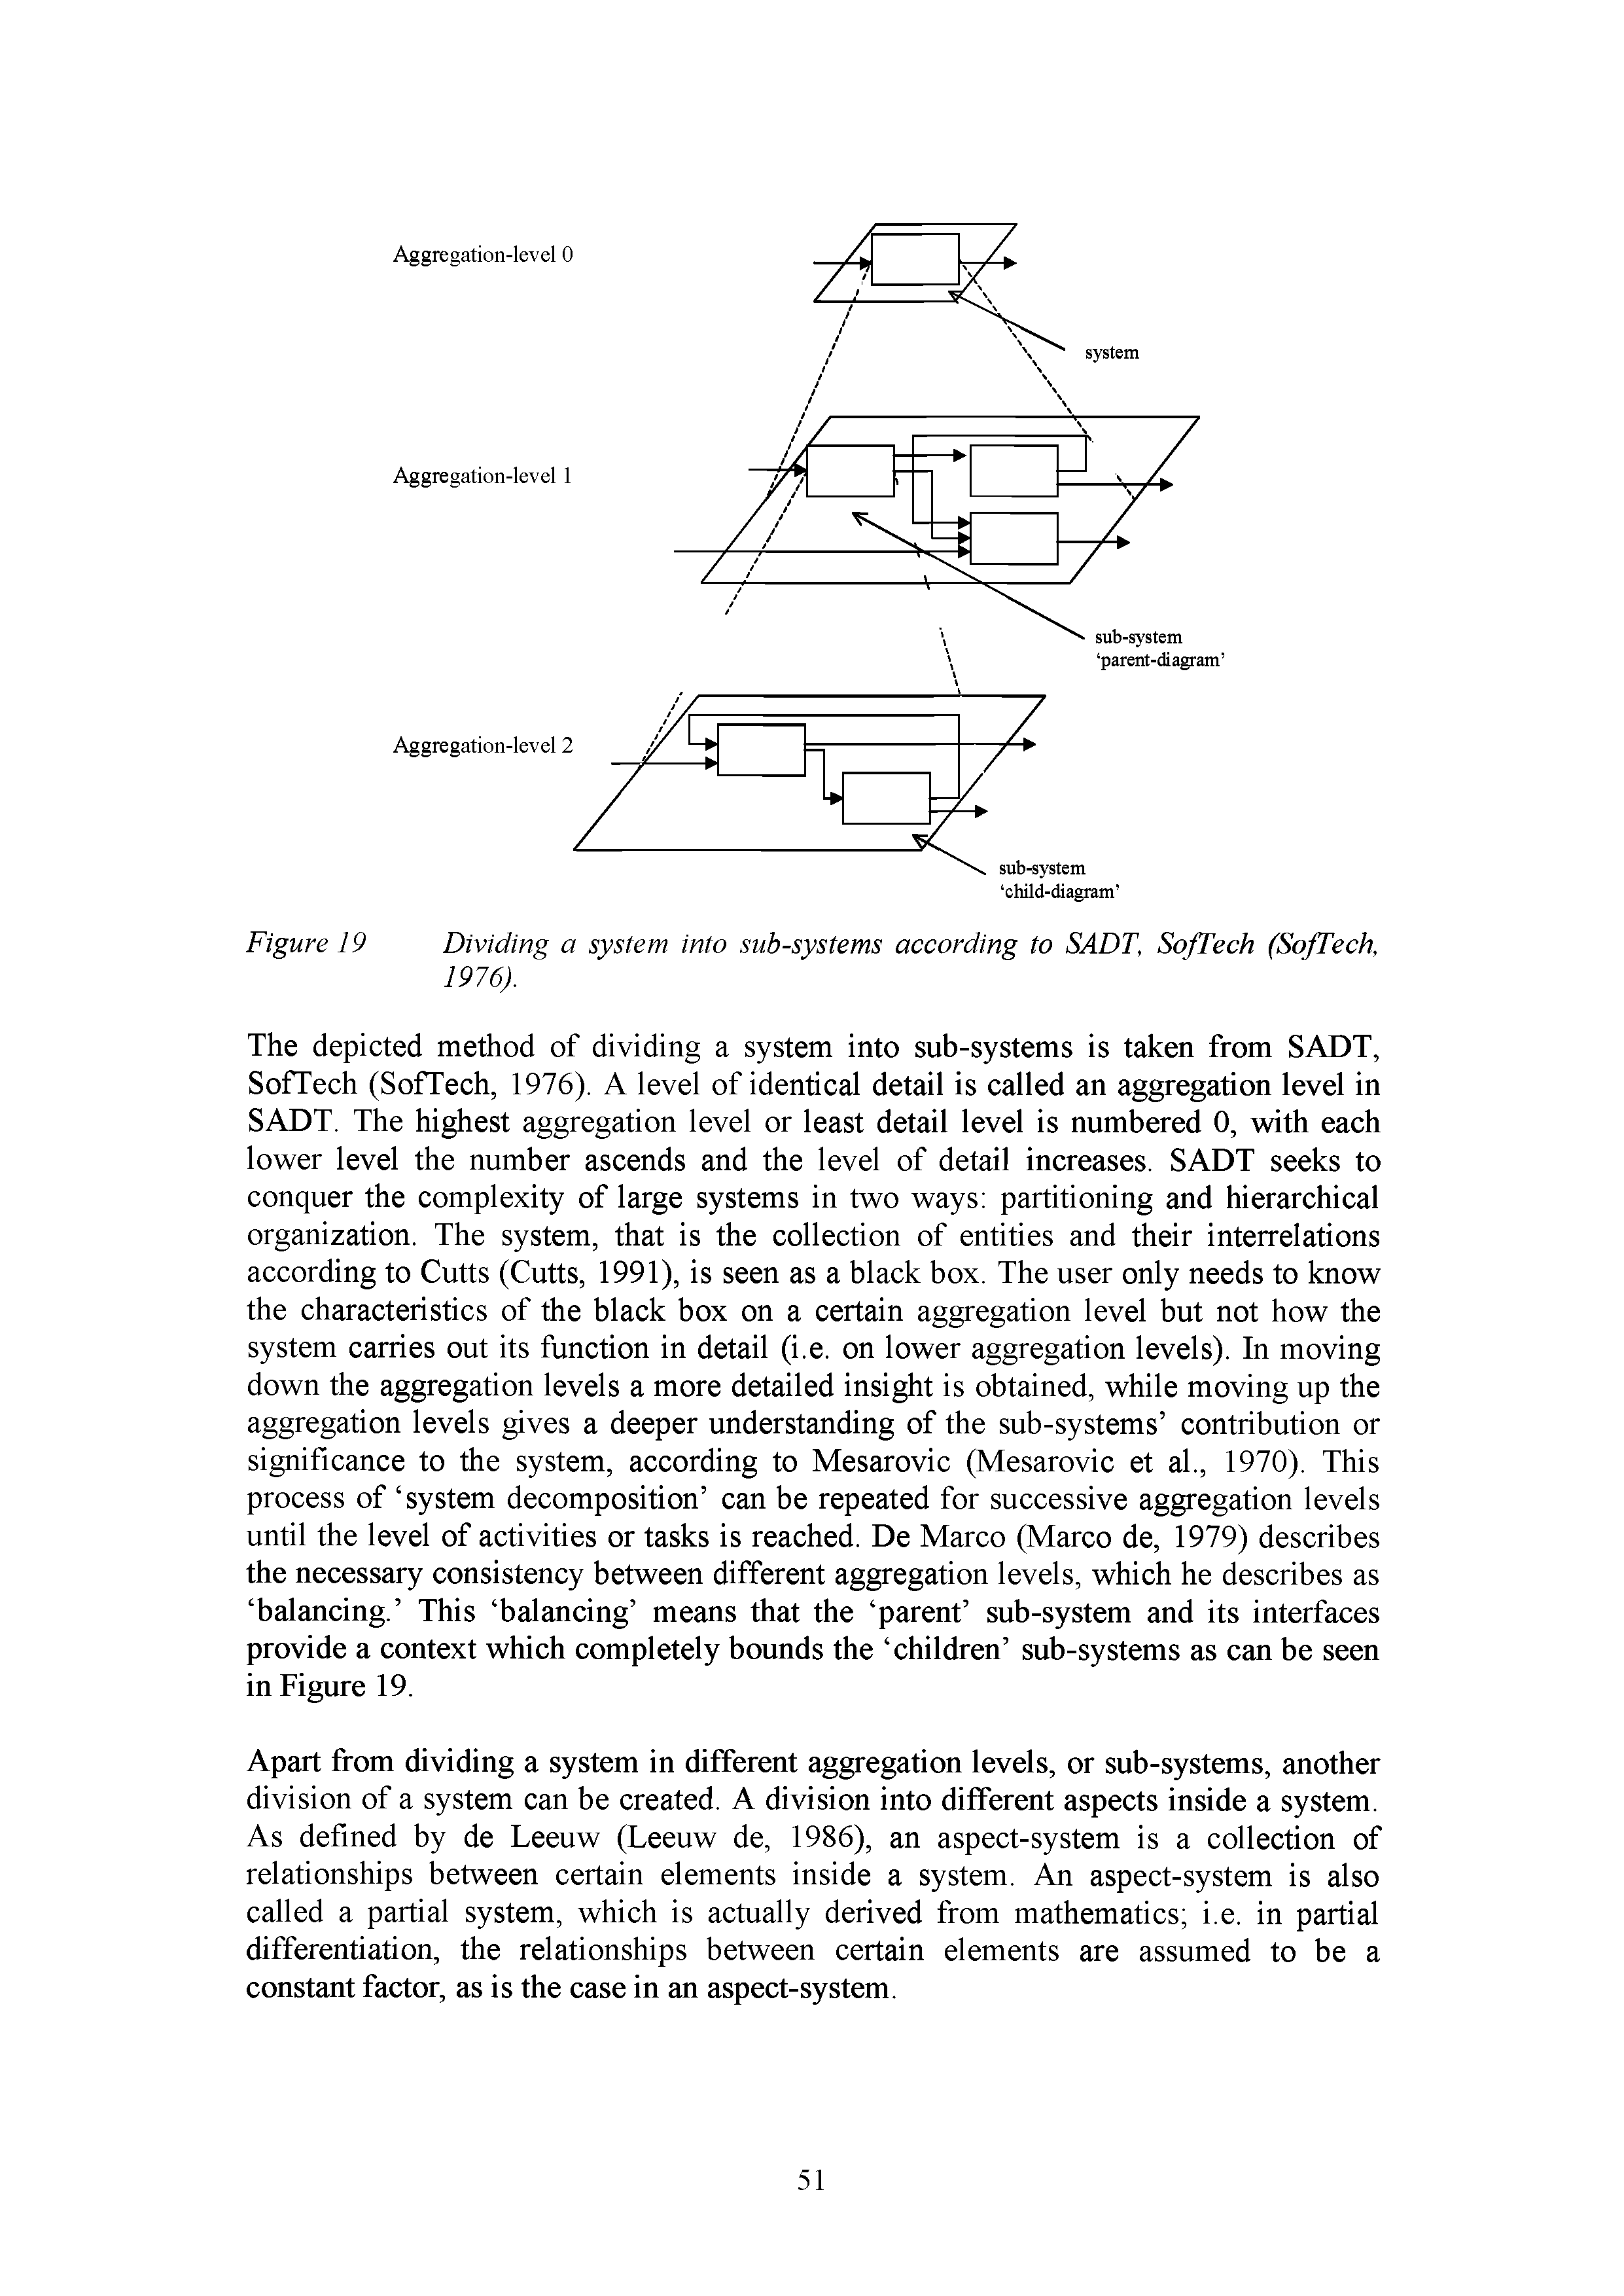 Figure 19 Dividing a system into sub-systems according to SADT, SofTech (SofTech, 1976).